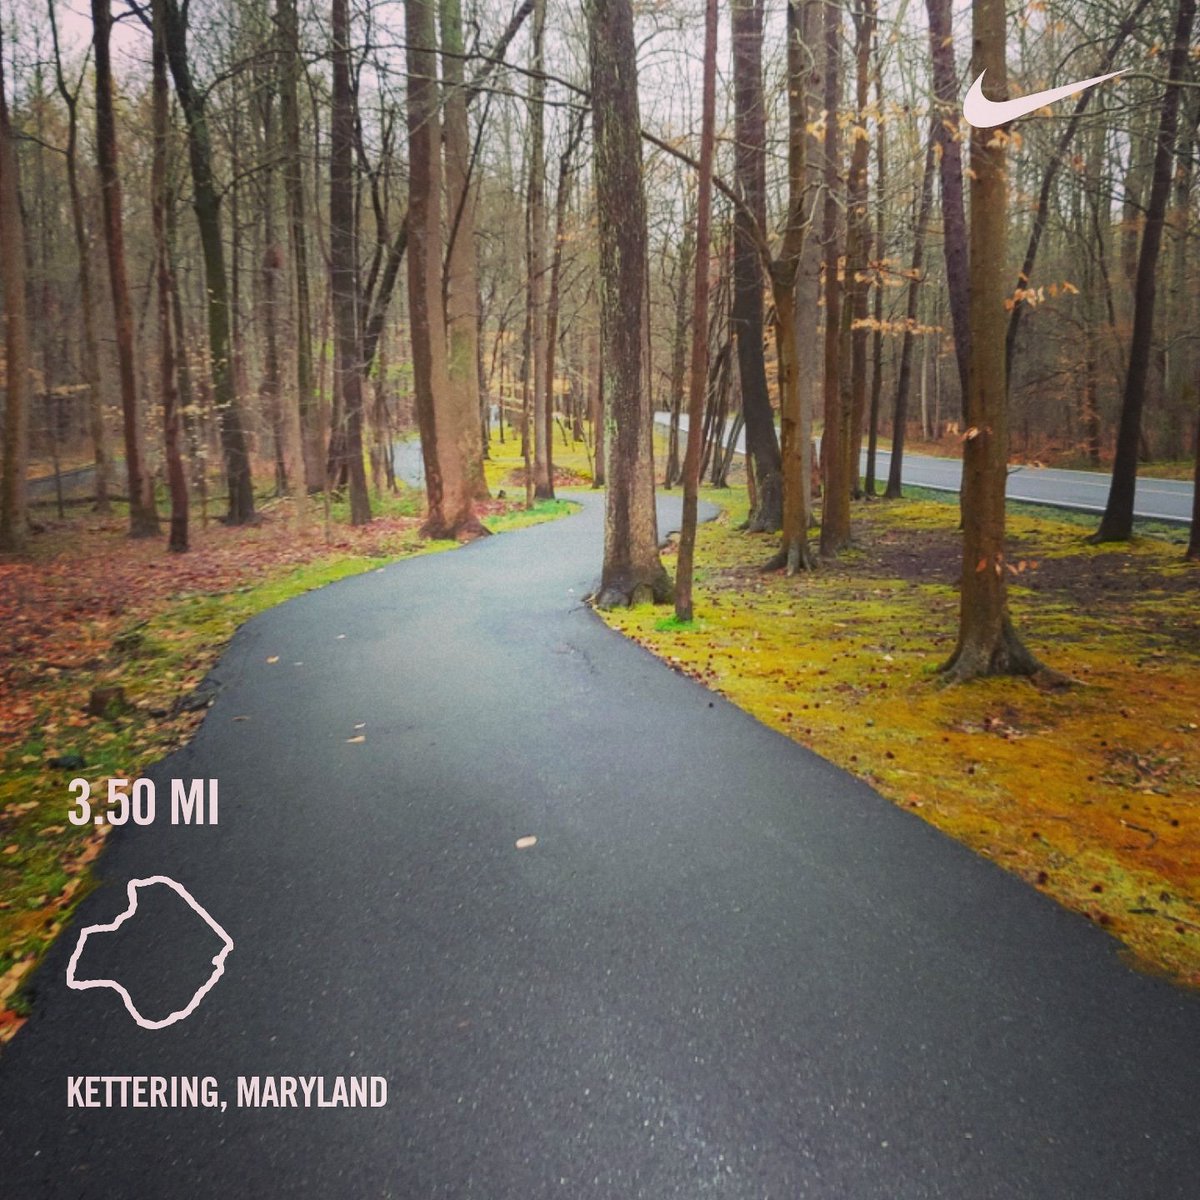 Rockin' intervals in between the rain. Some how we managed to get in the Saturday morning miles at the perfect time. Now it can rain all weekend for all I care. Nature is great for helping your wellness during this  #COVID19 mess. Plenty of space for  #SocialDistancing